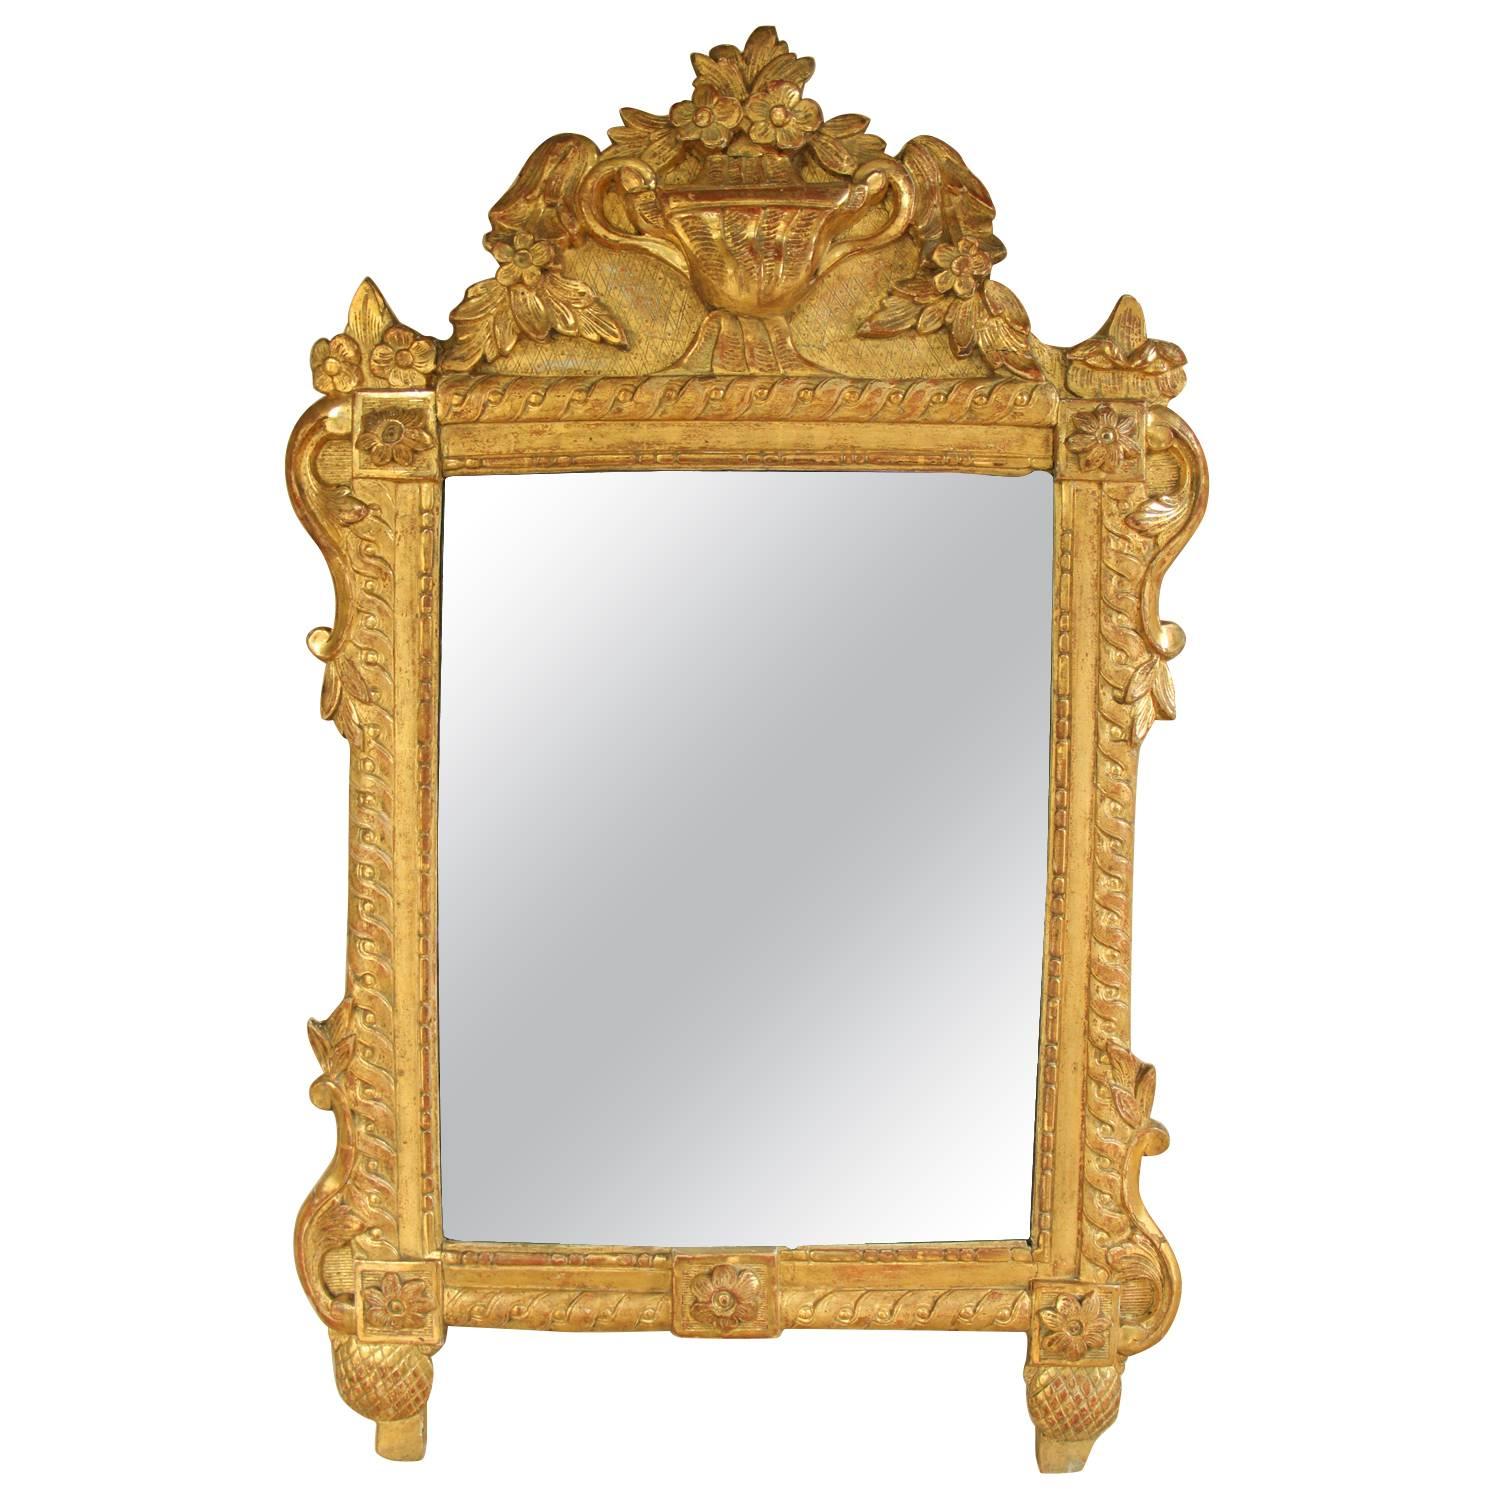 French Louis XVI Richly Carved Gilt Mirror for Vanity or Wall, 18th Century